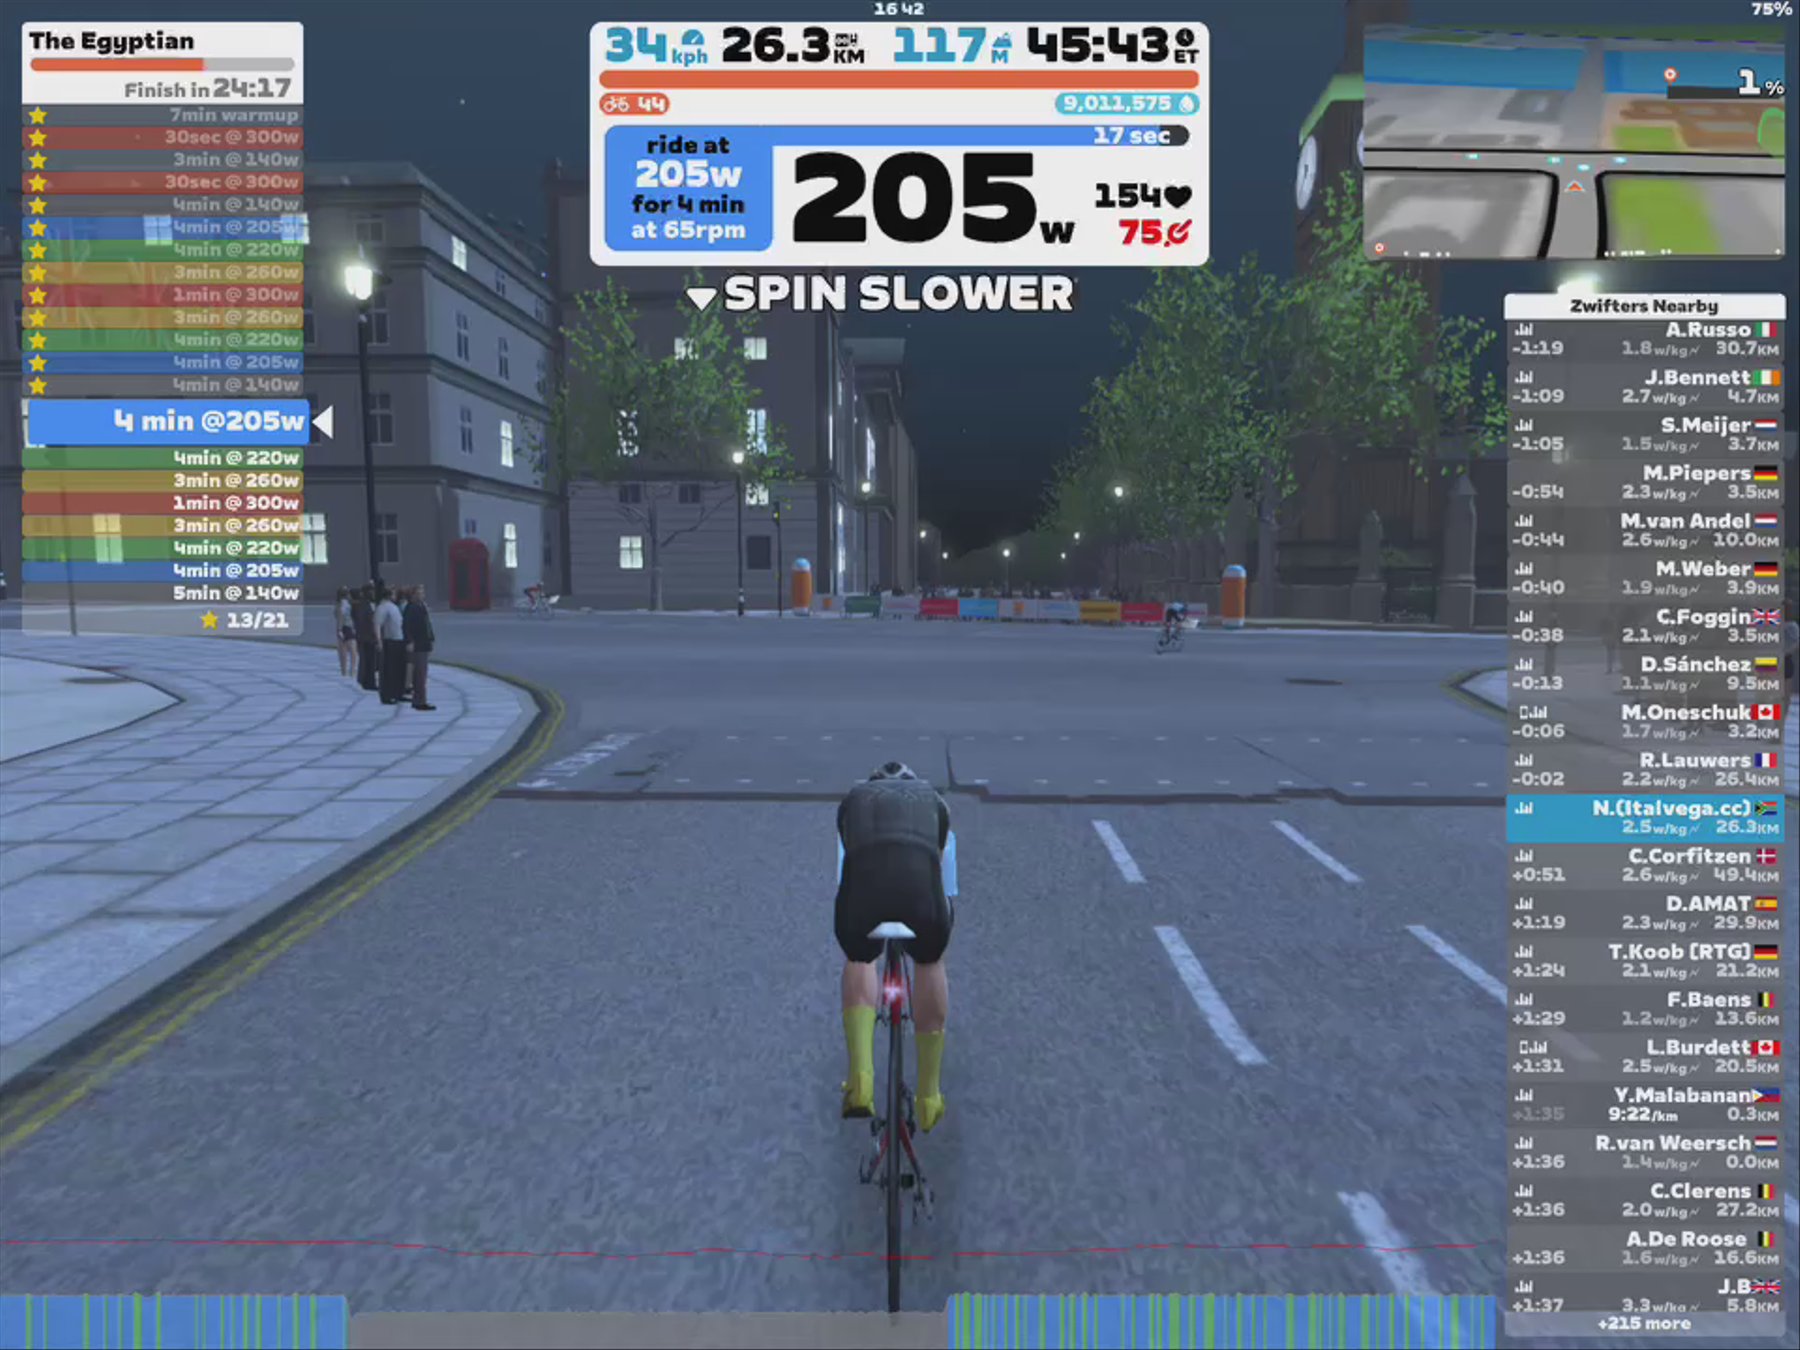 Zwift - The Egyptian in London